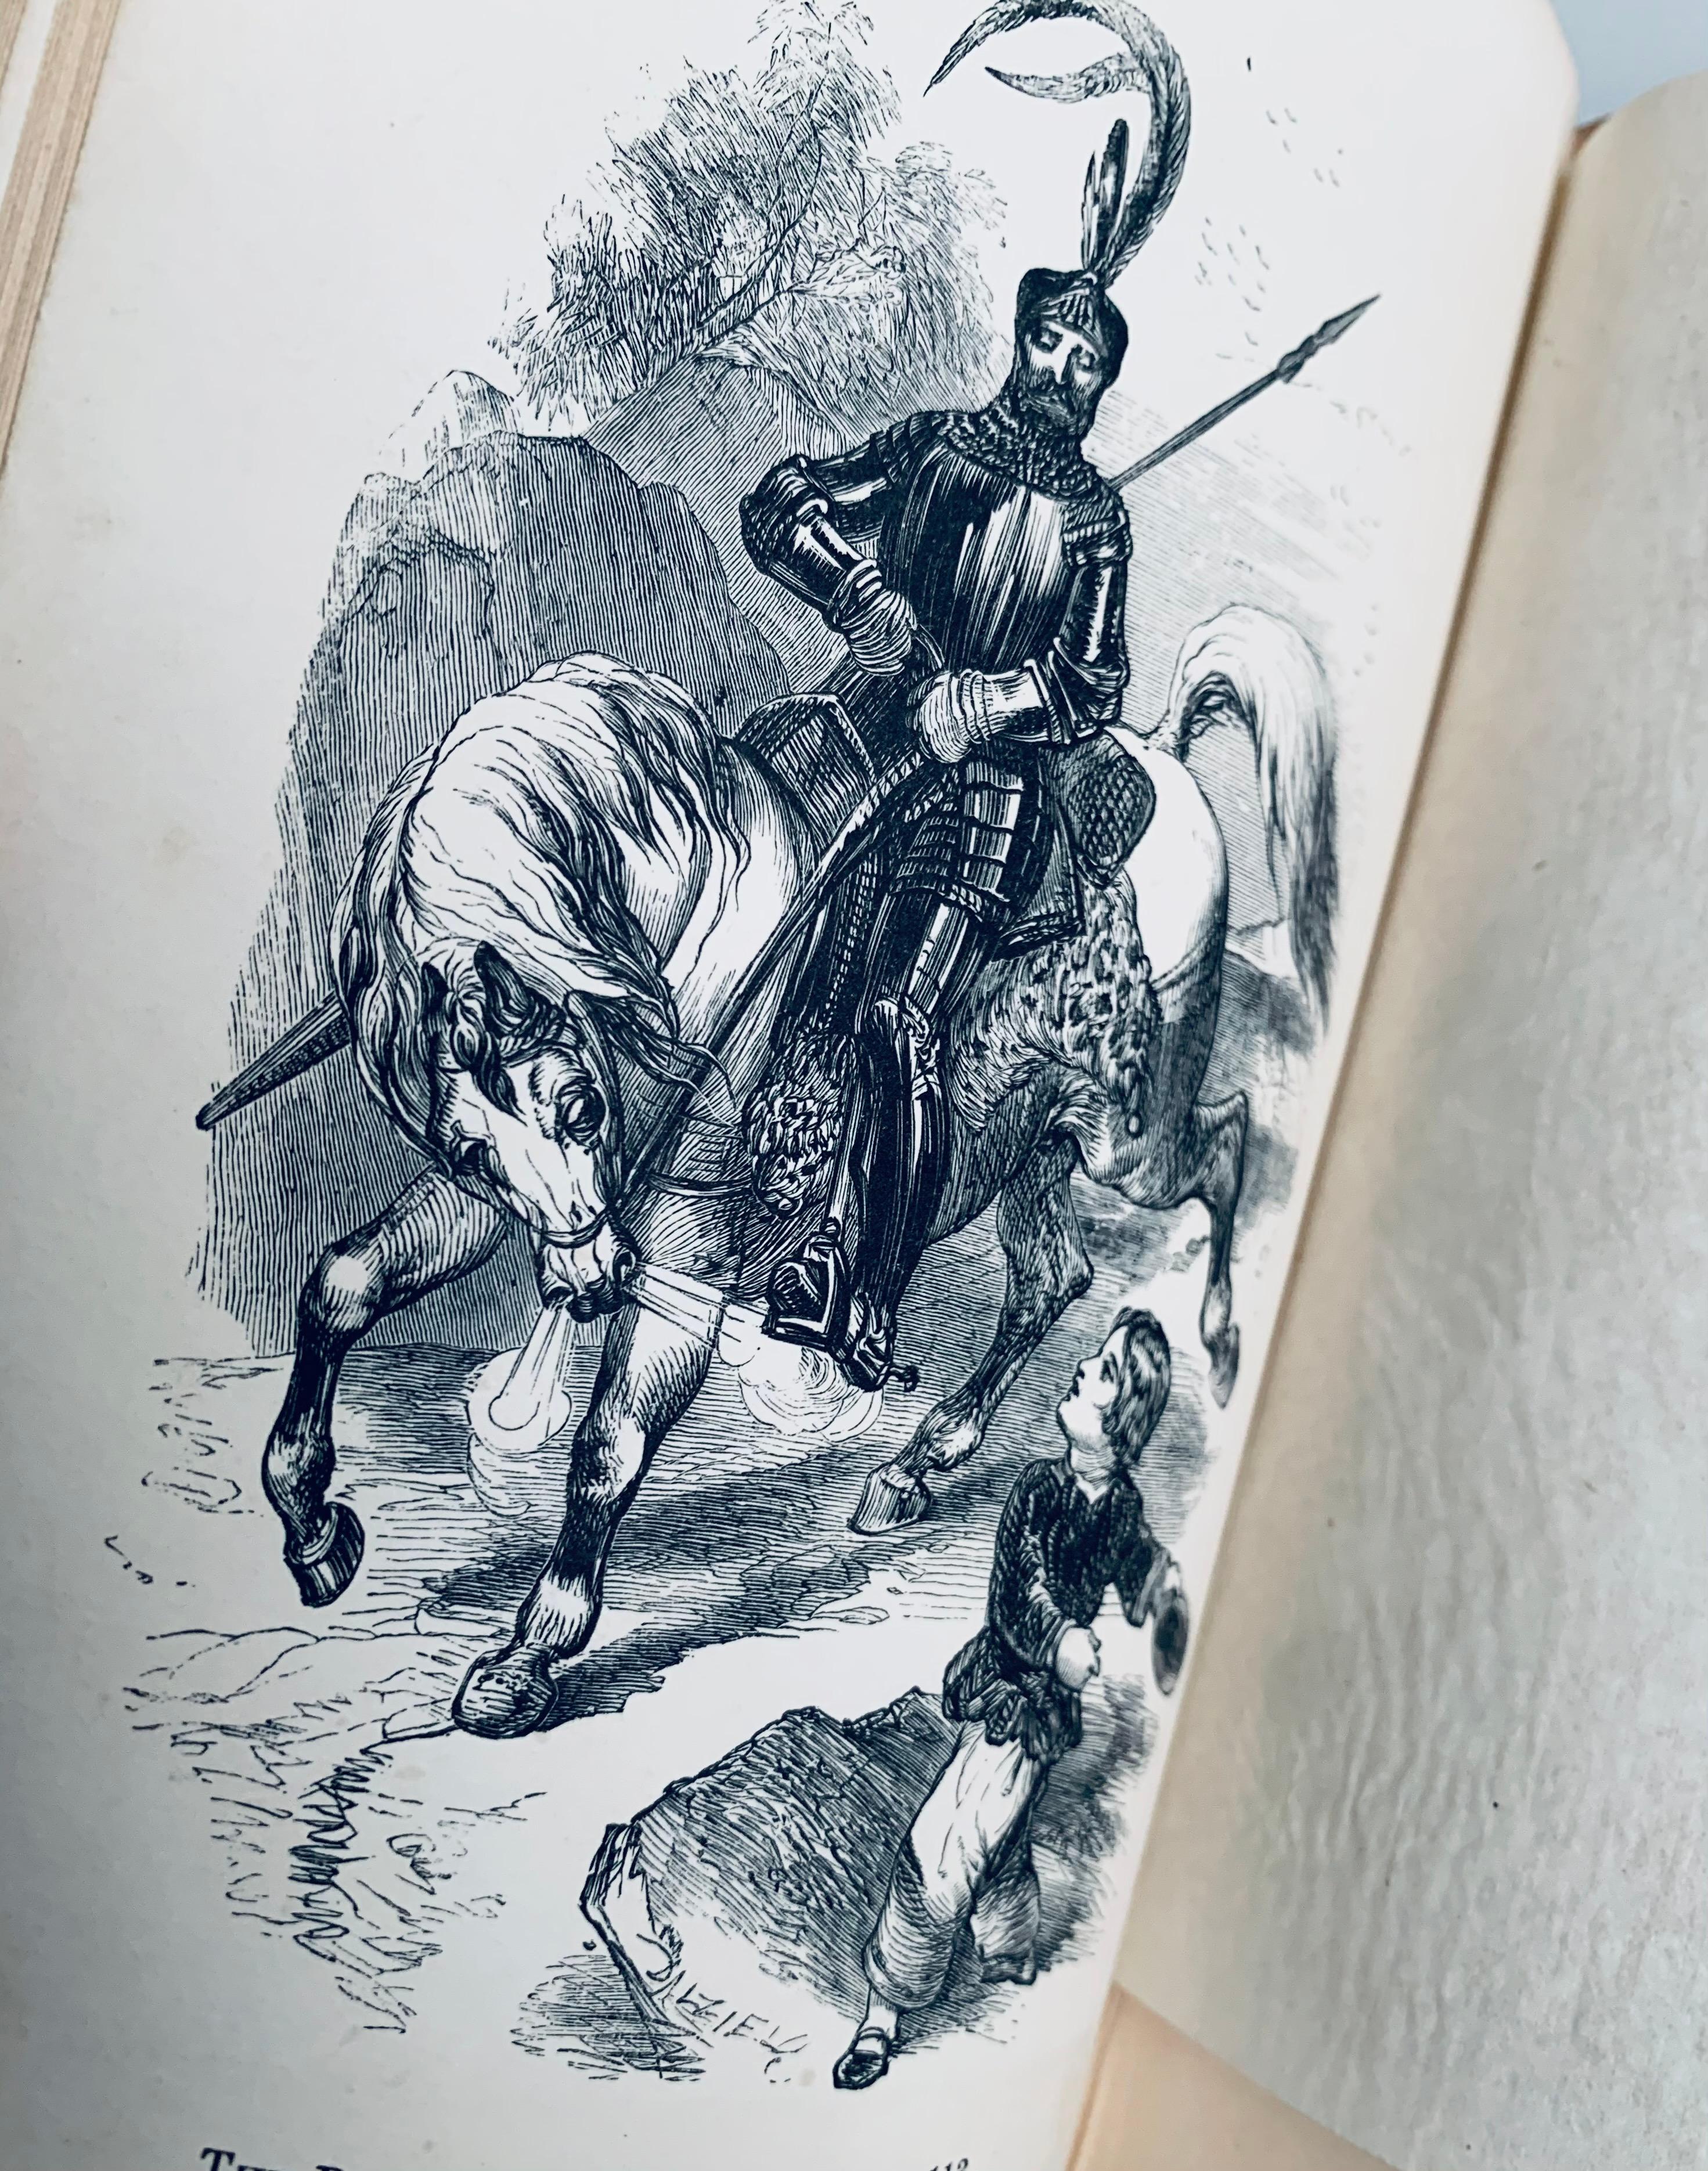 RARE Fairy Gold for Young and Old: In Eighteen Tales (1857)